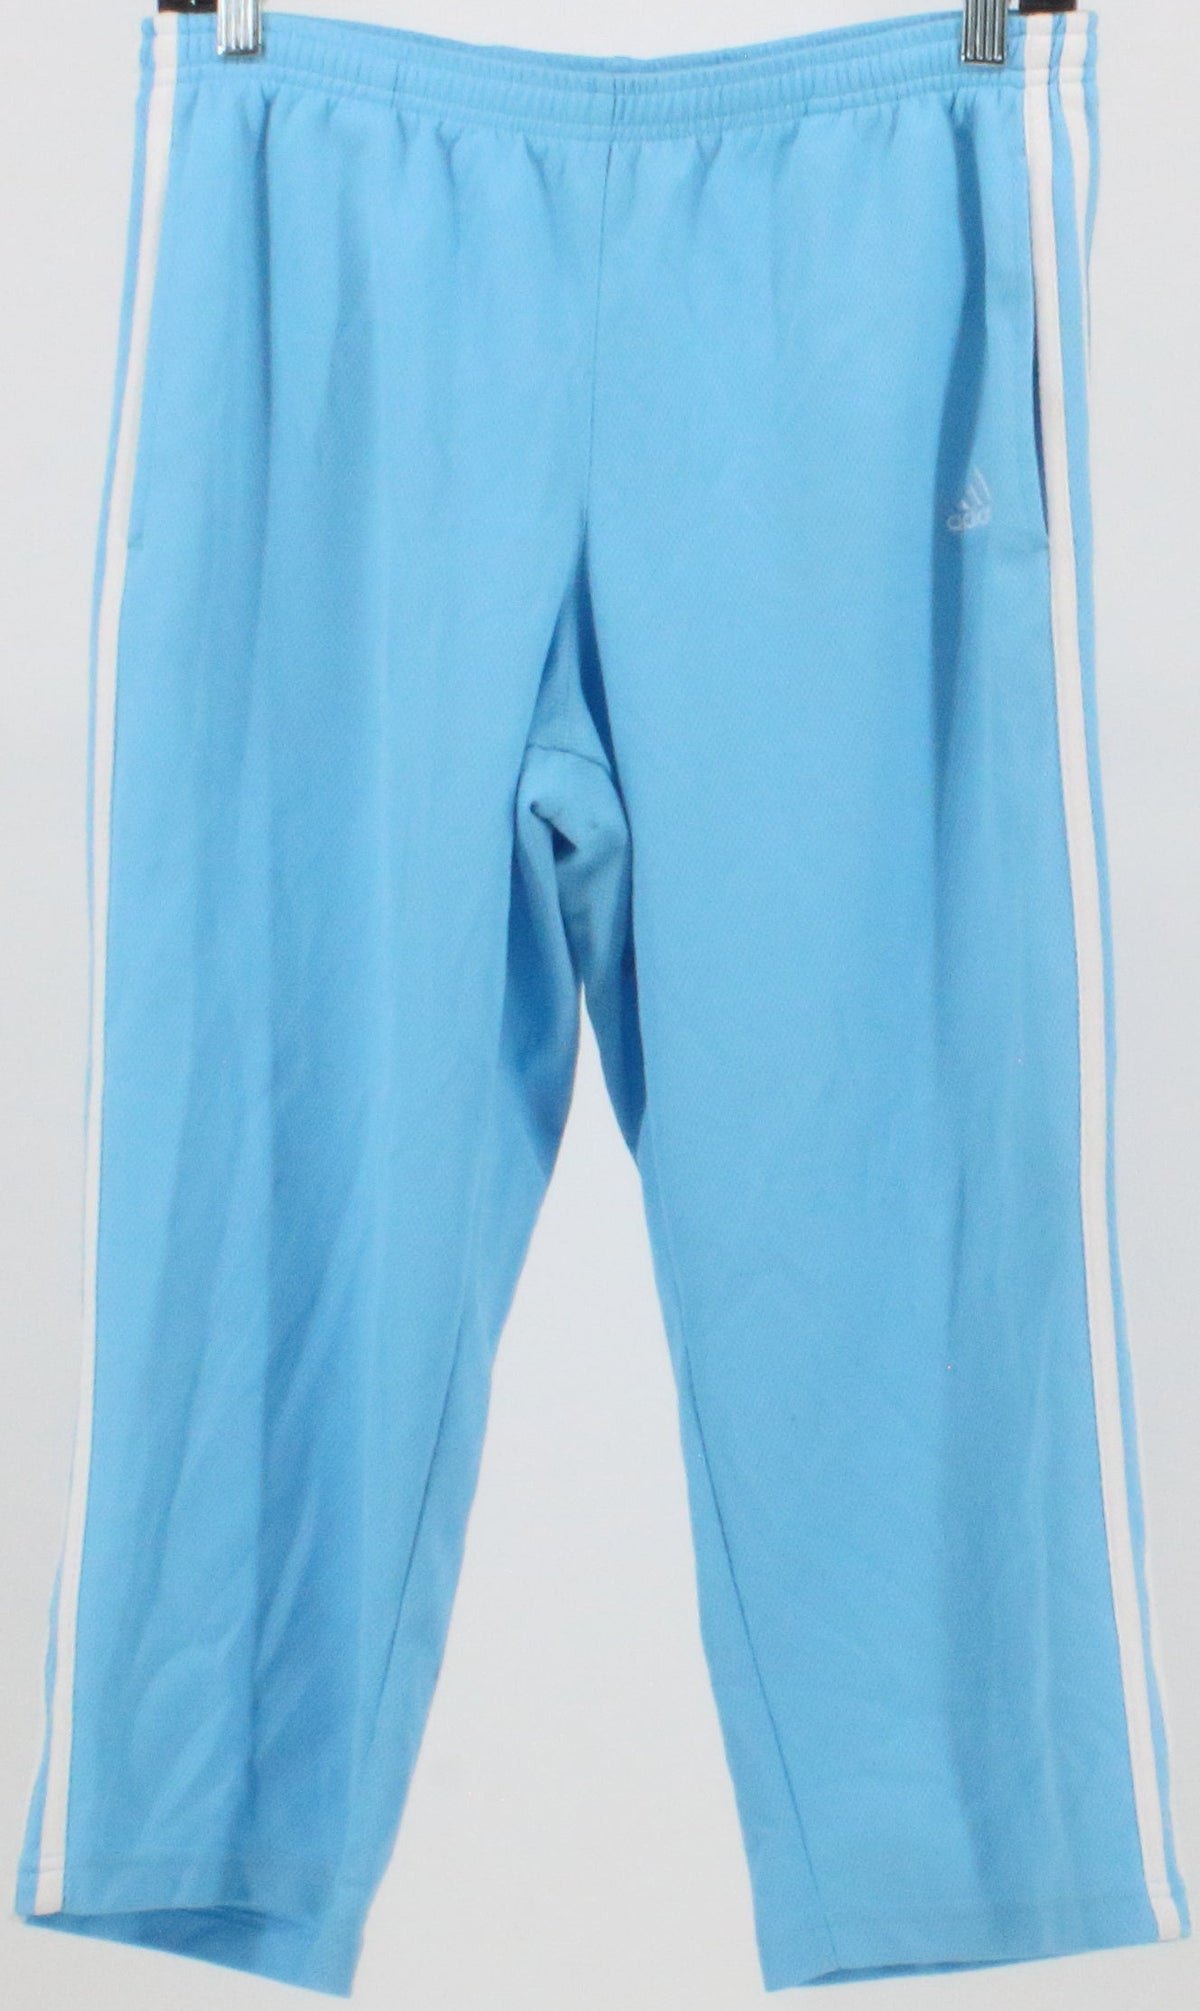 Adidas Light Blue and White Active Pants